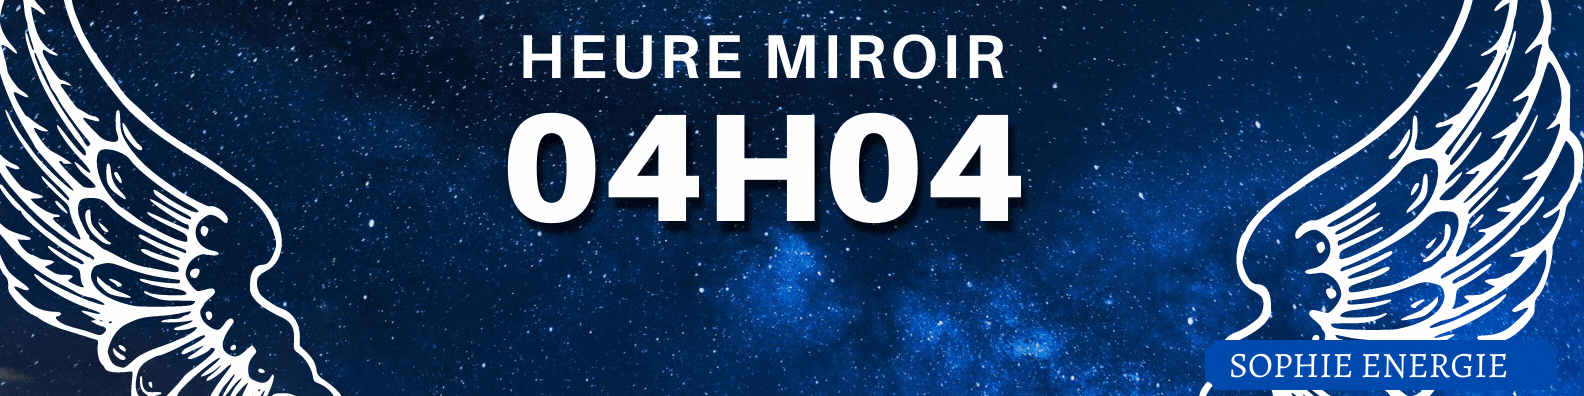 HEURE MIROIR anges 04h04